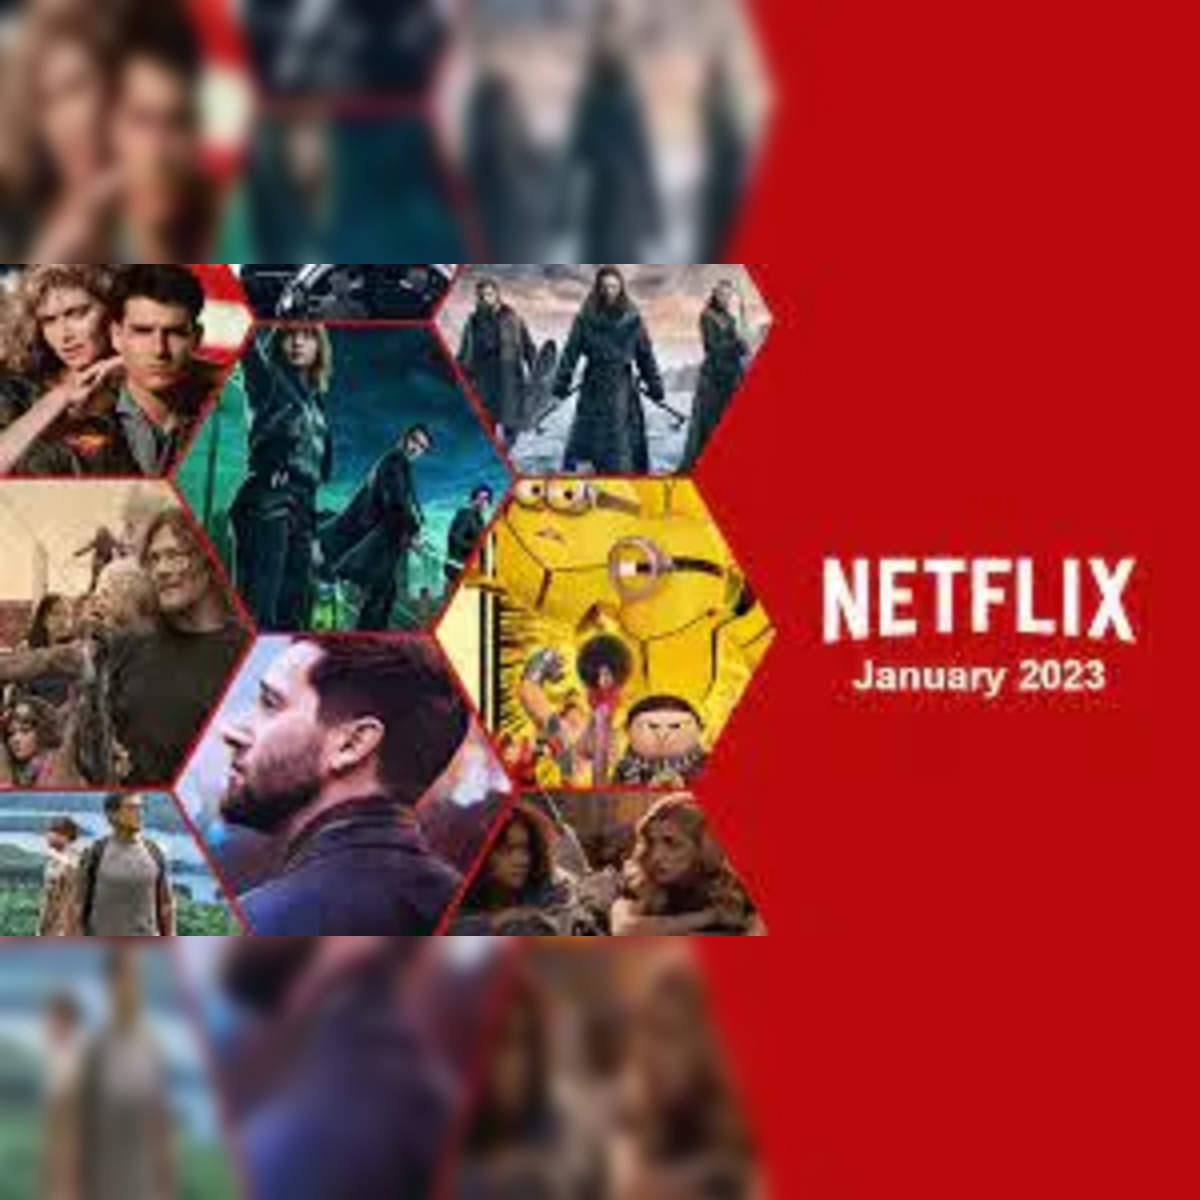 The 10 Most Anticipated Netflix Films and TV Shows in 2022